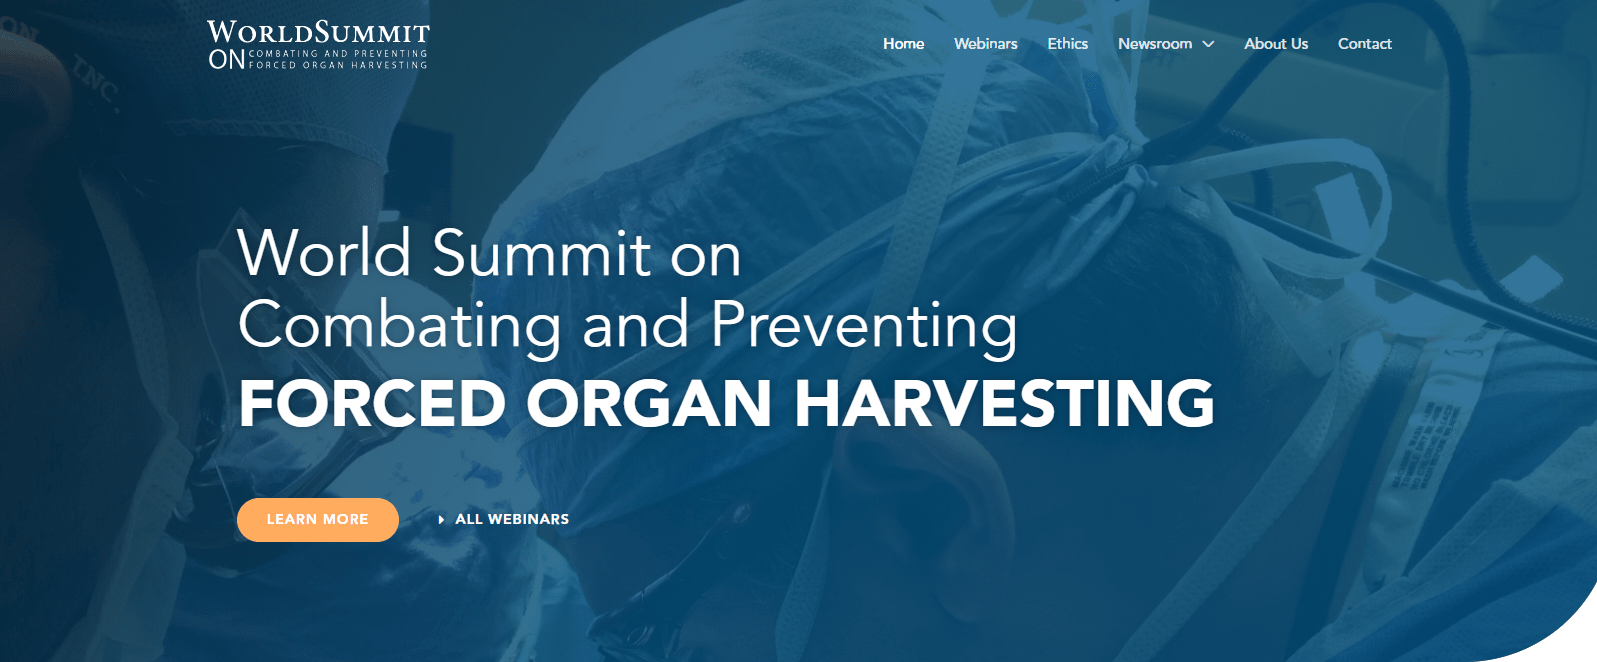 World Summit on Combating and Preventing FORCED ORGAN HARVESTING